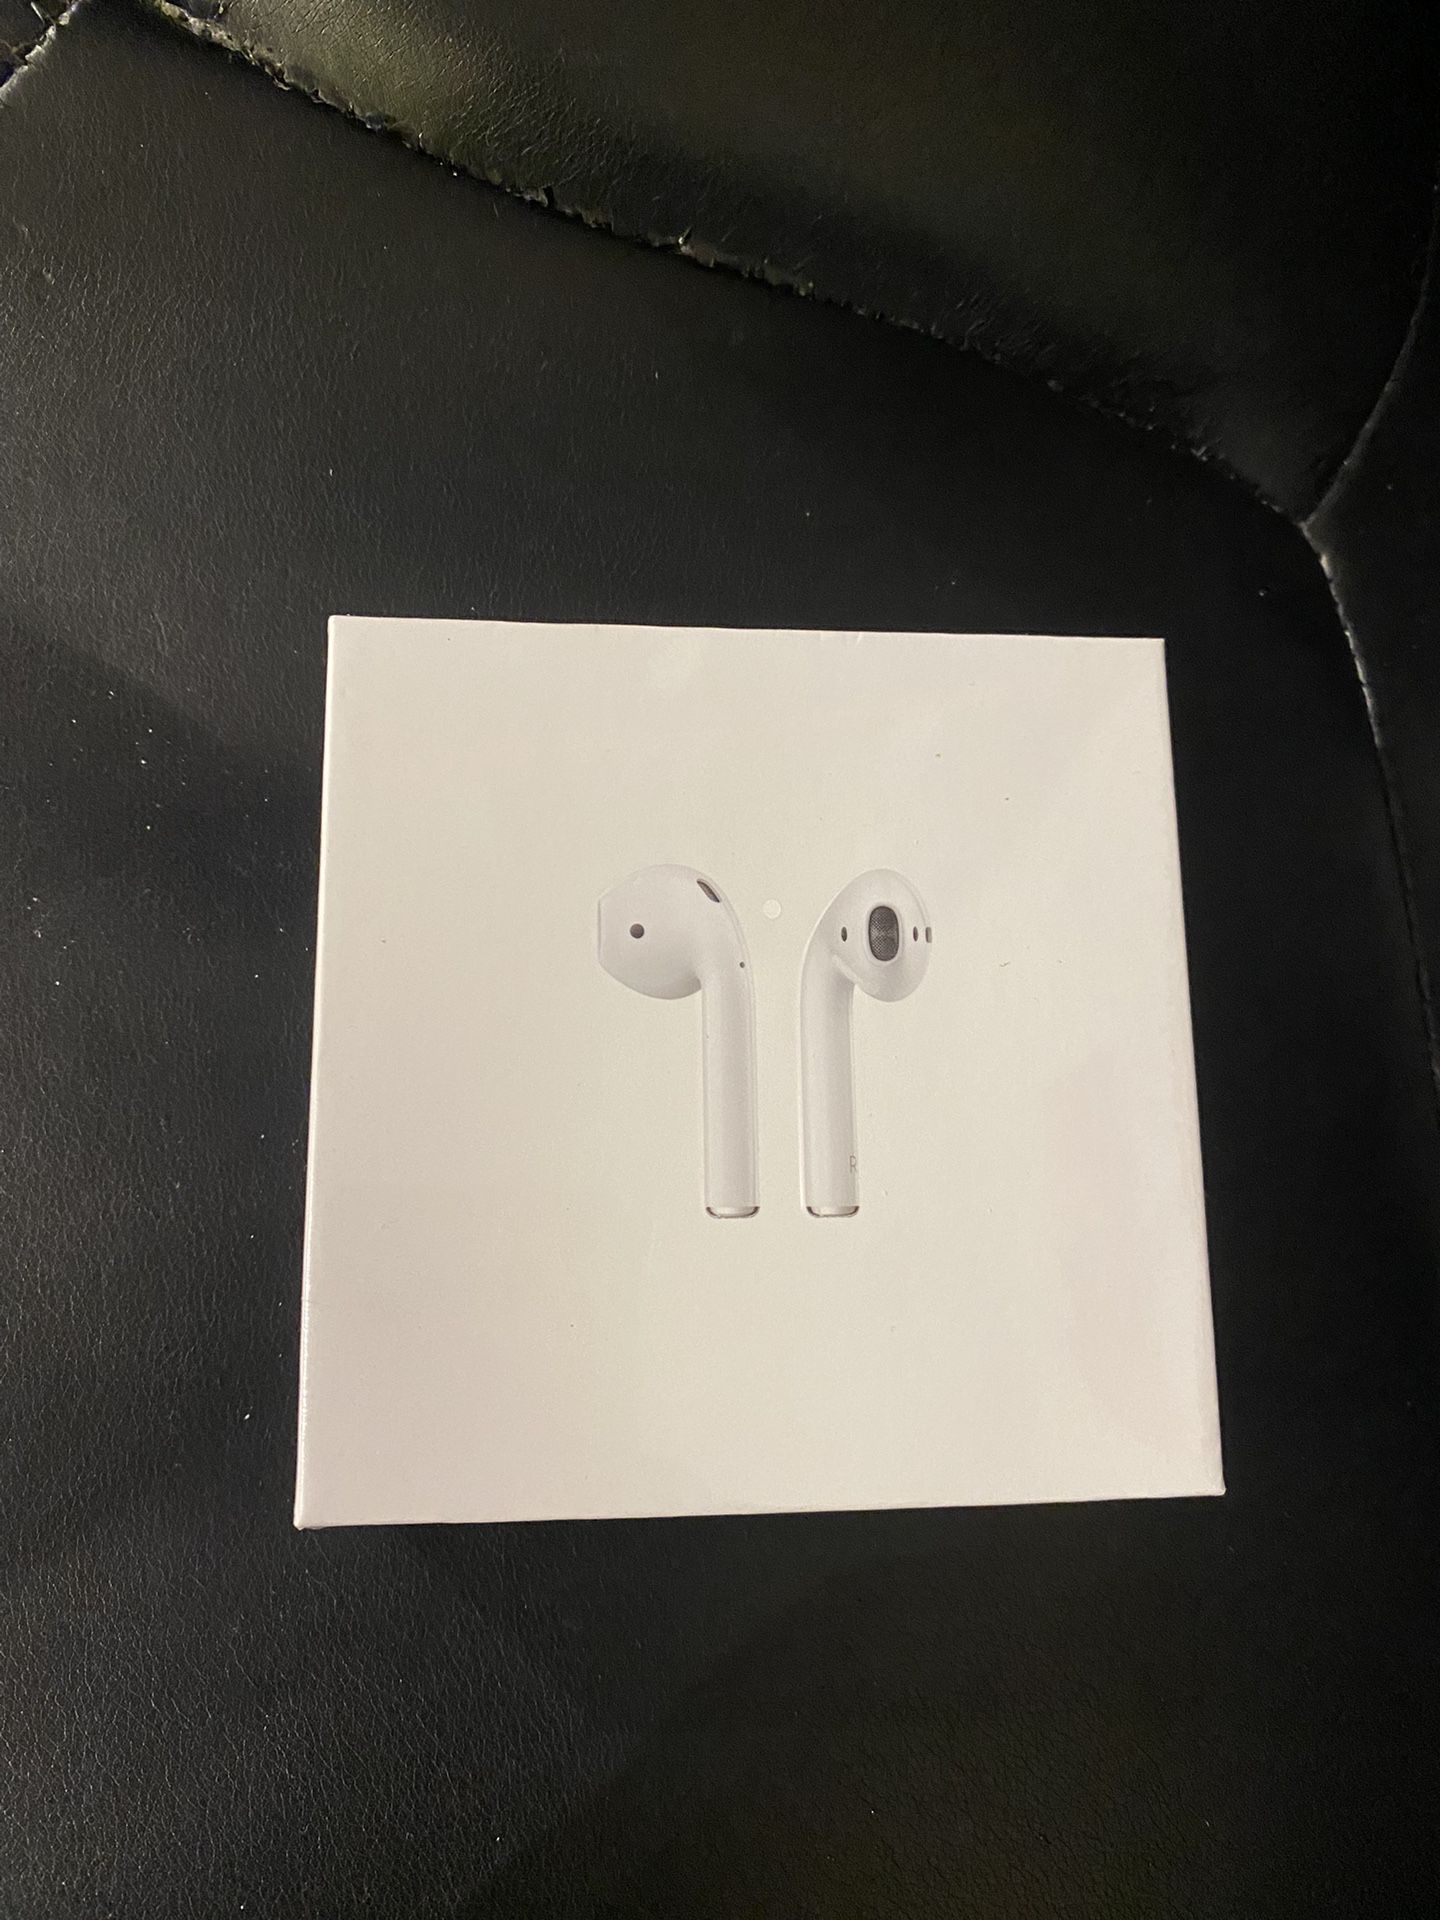 Apple AirPods (2nd Generation) Wireless Earbuds with Lightning Charging Case Included. Over 24 Hours of Battery Life, Effortless Setup. Bluetooth Head